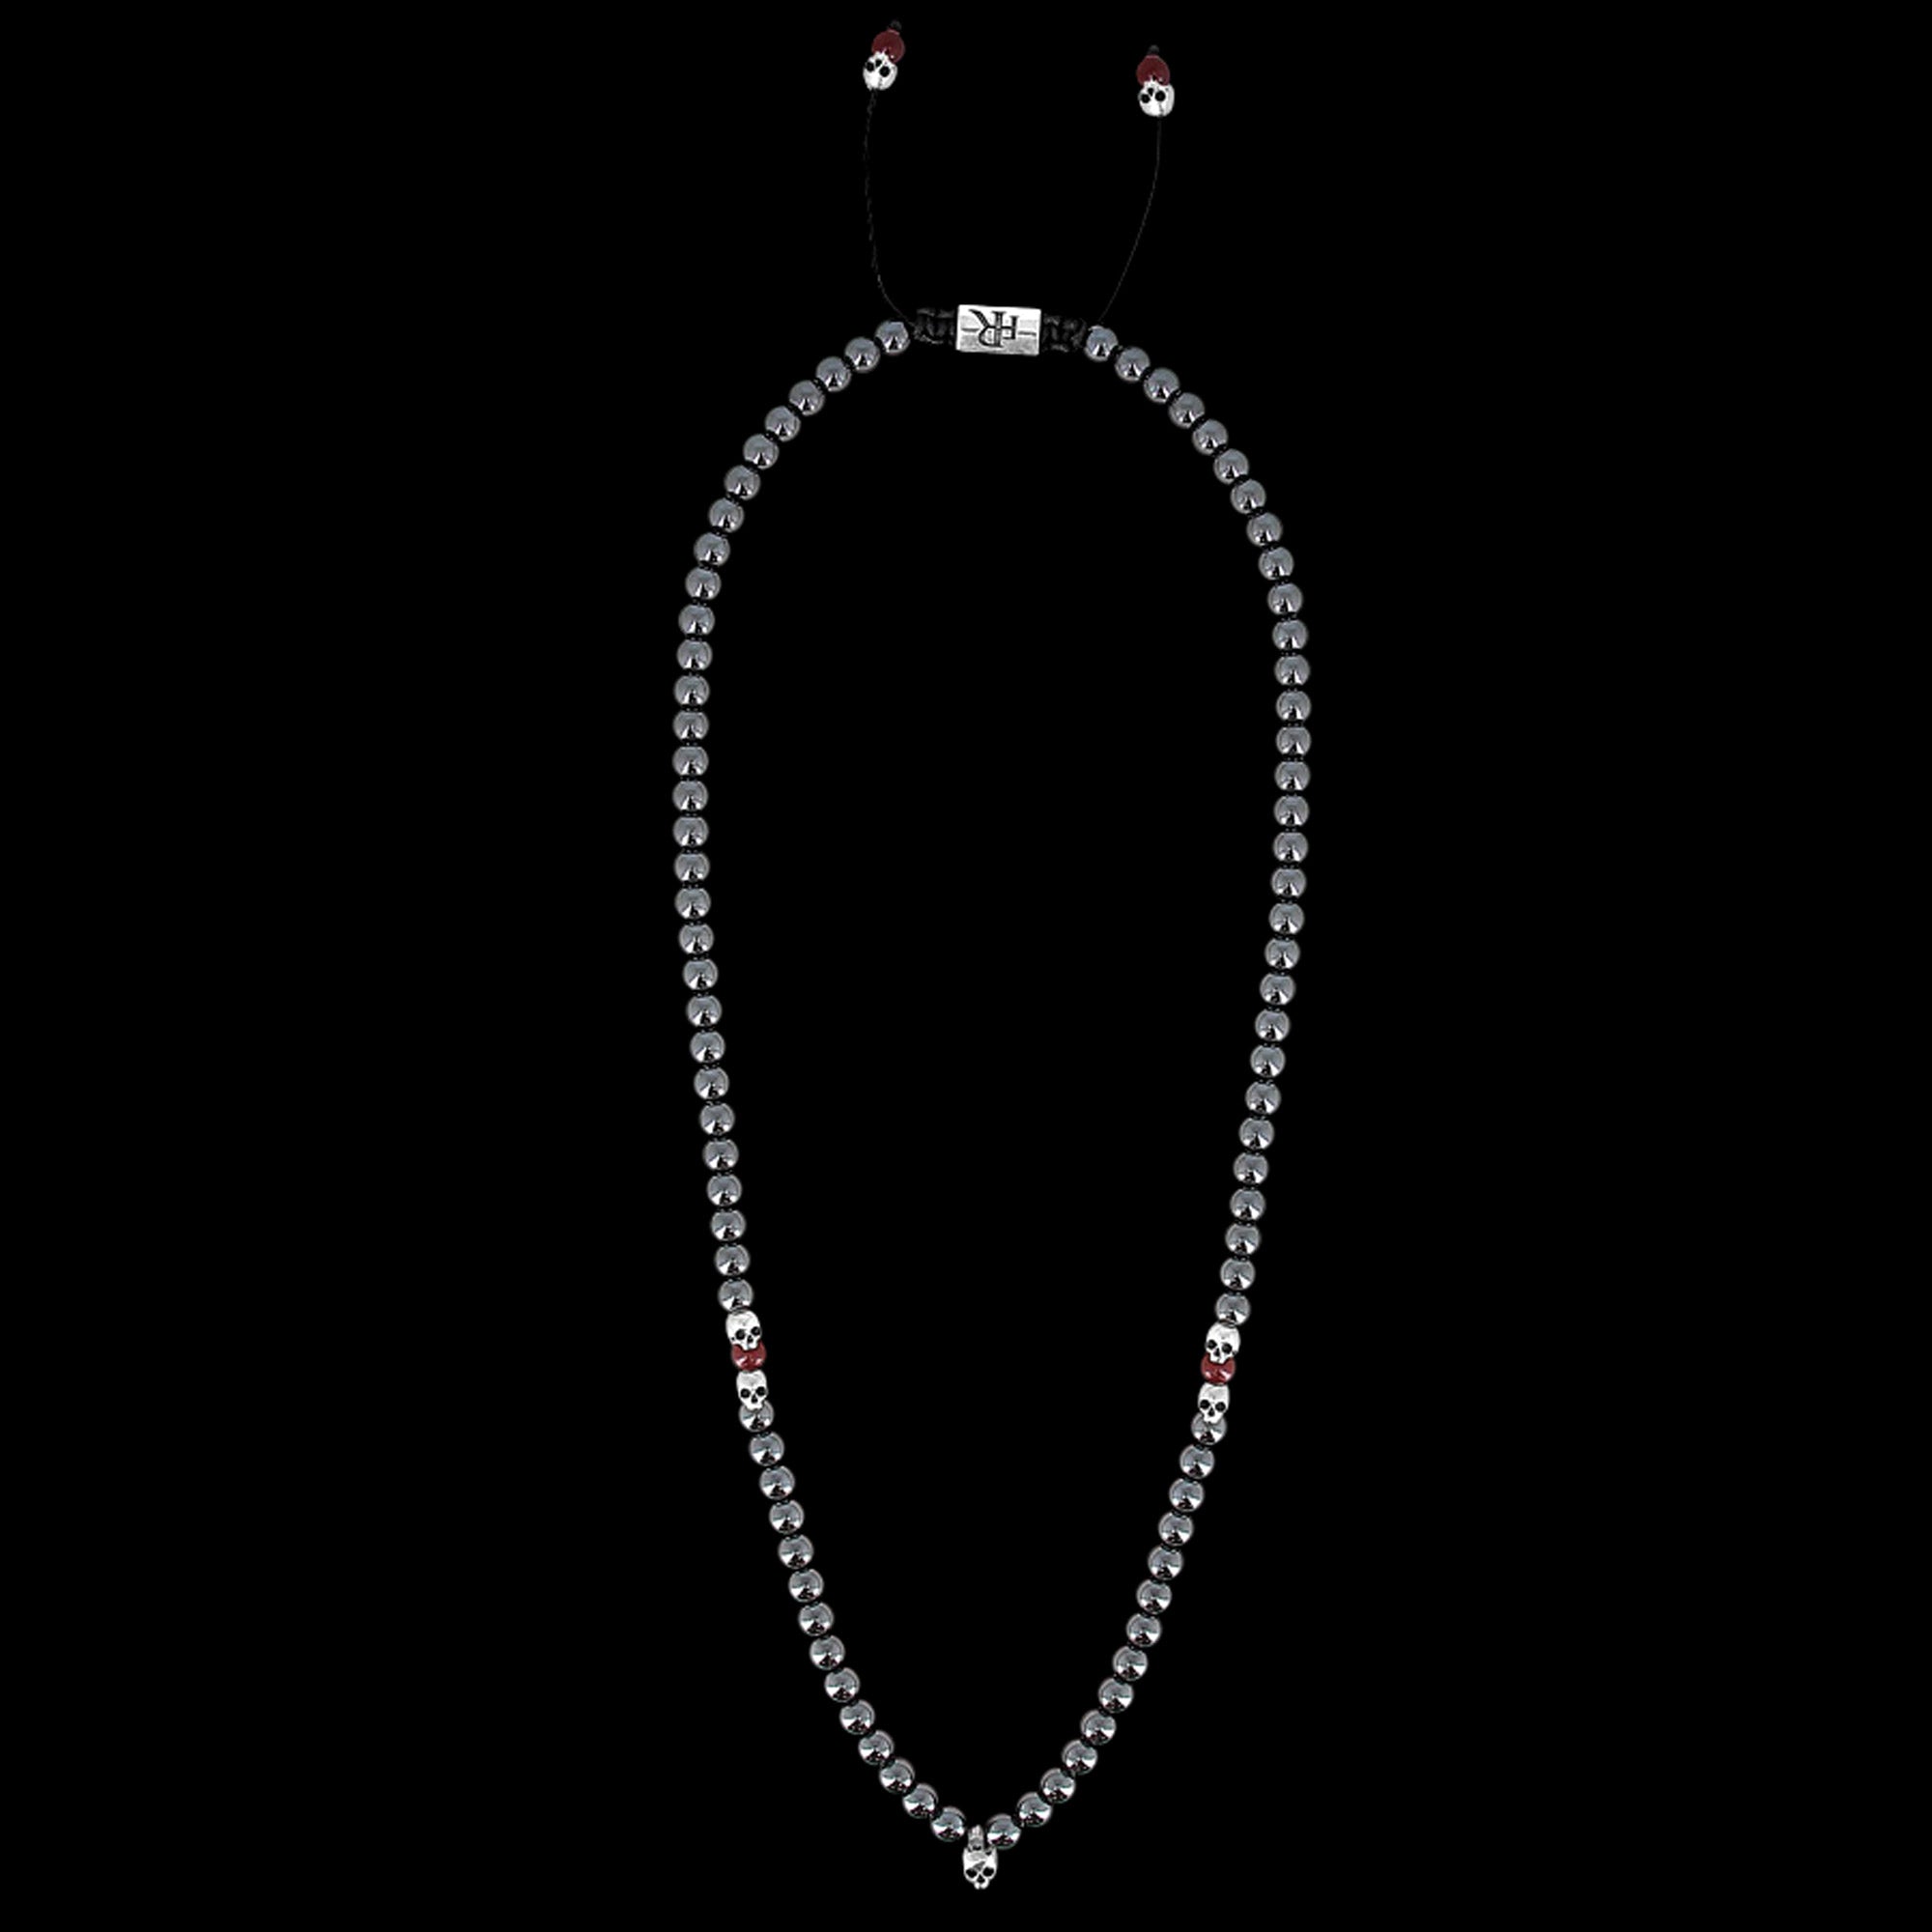 Le Joly - Gemstones necklace with Sterling silver skulls